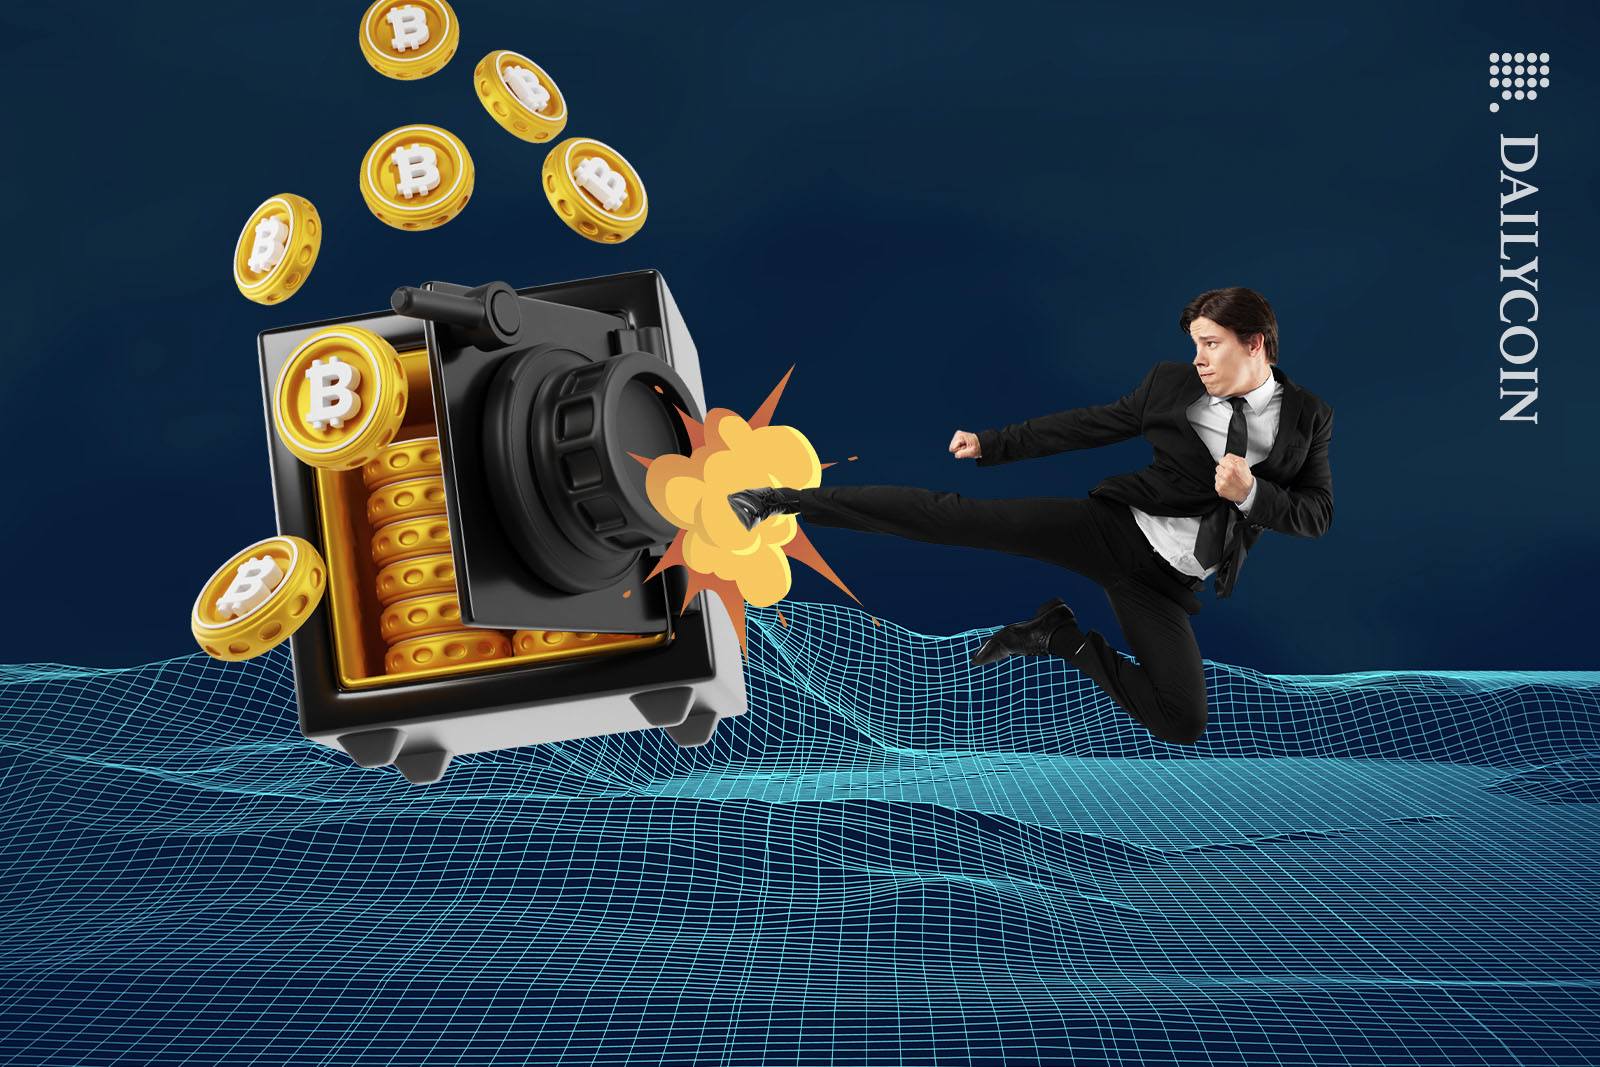 Young suited man kicks a safe full of Bitcoin, making Bitcoins fly out of it.